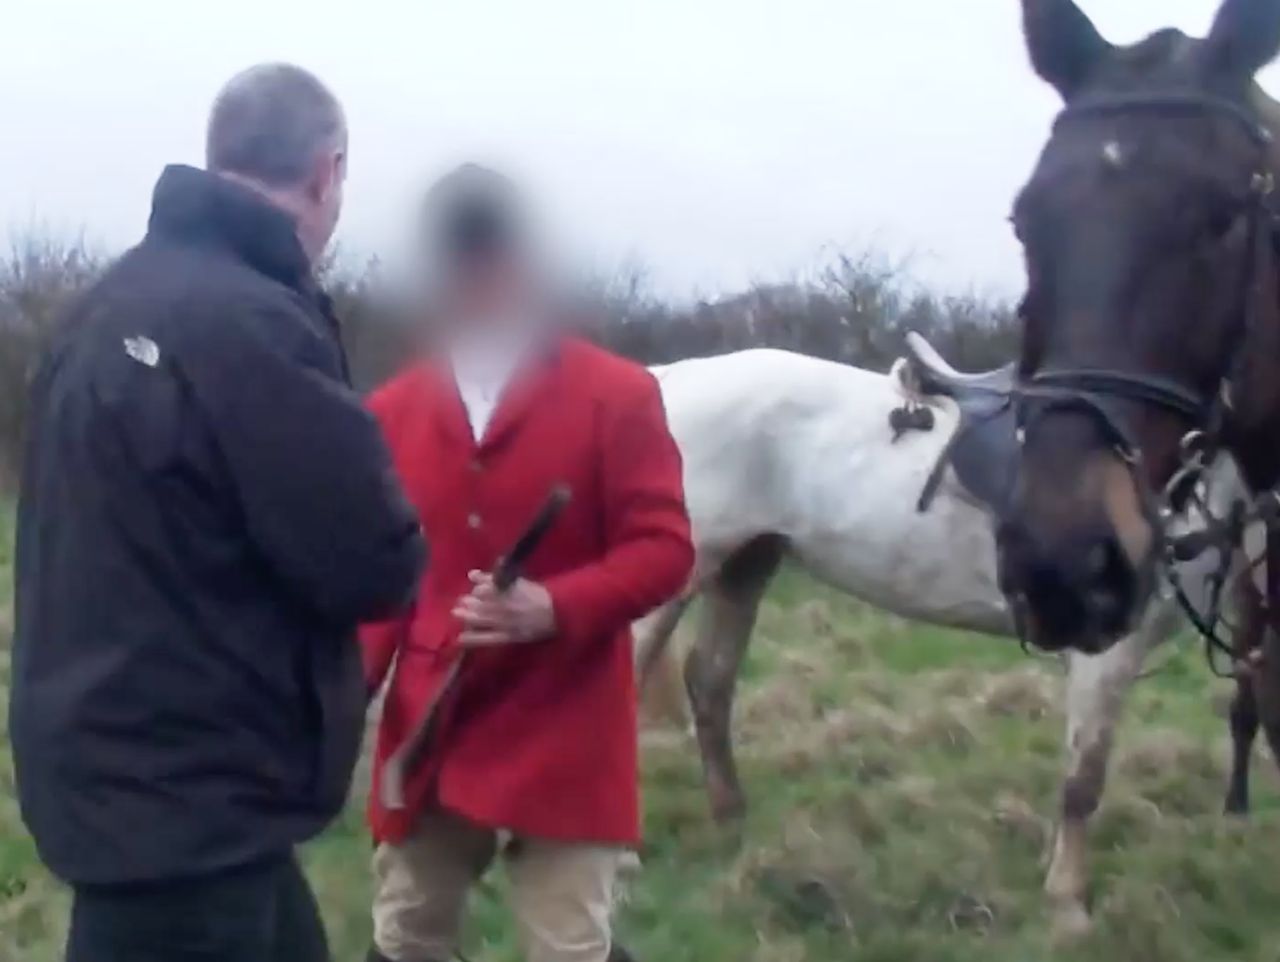 A confrontation between the hunt and sabs, recorded on a sab's body camera.